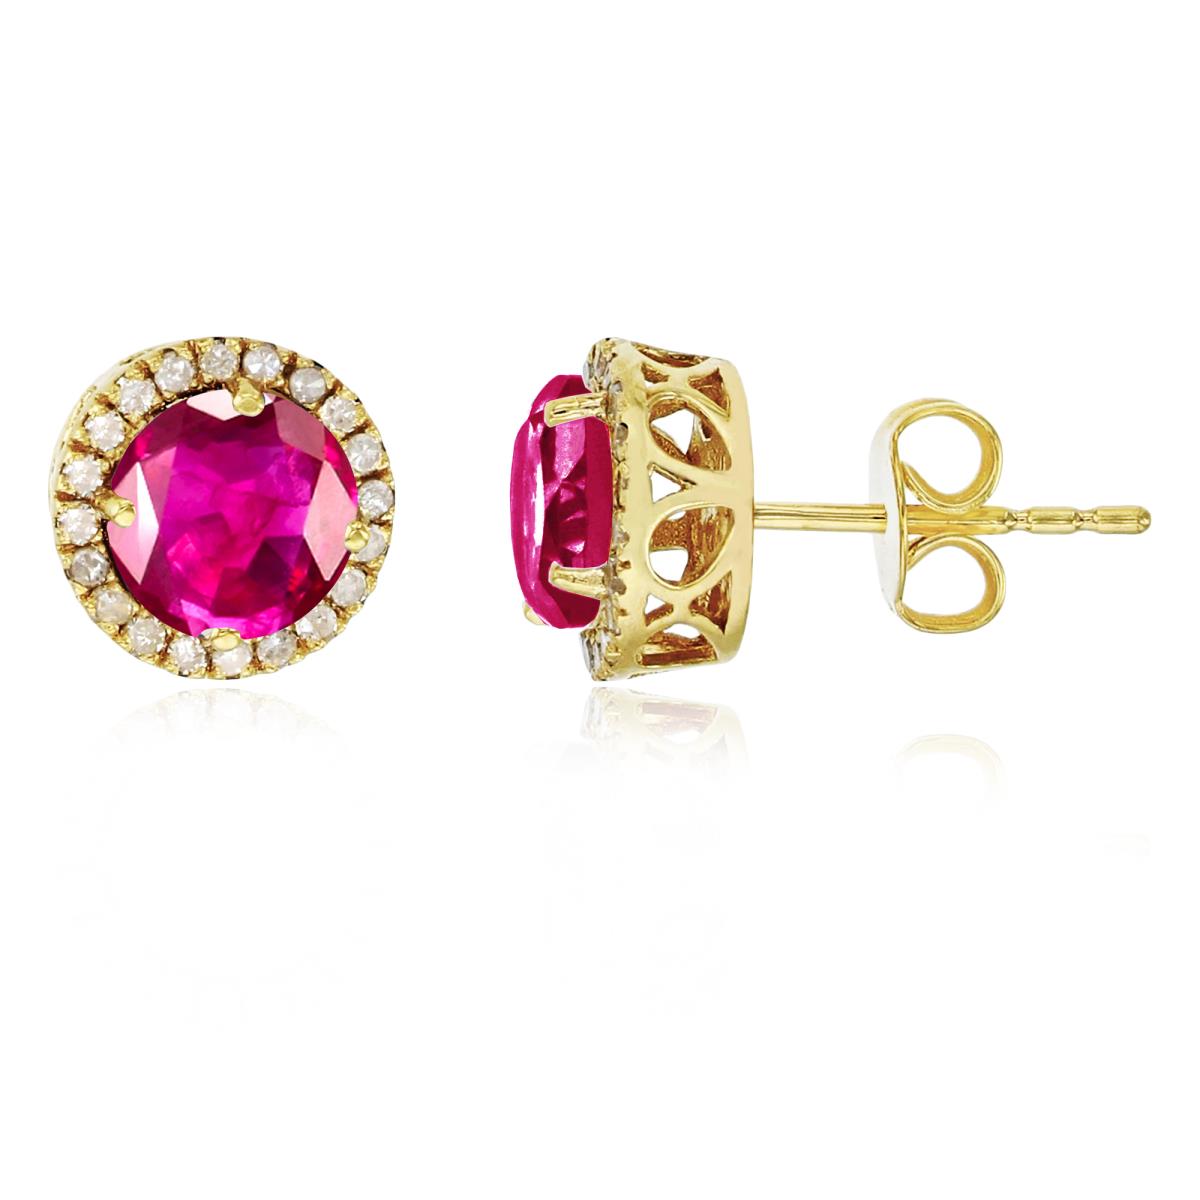 10K Yellow Gold 6mm Round Glass Filled Ruby & 0.2 CTTW Diamond Halo Stud Earring